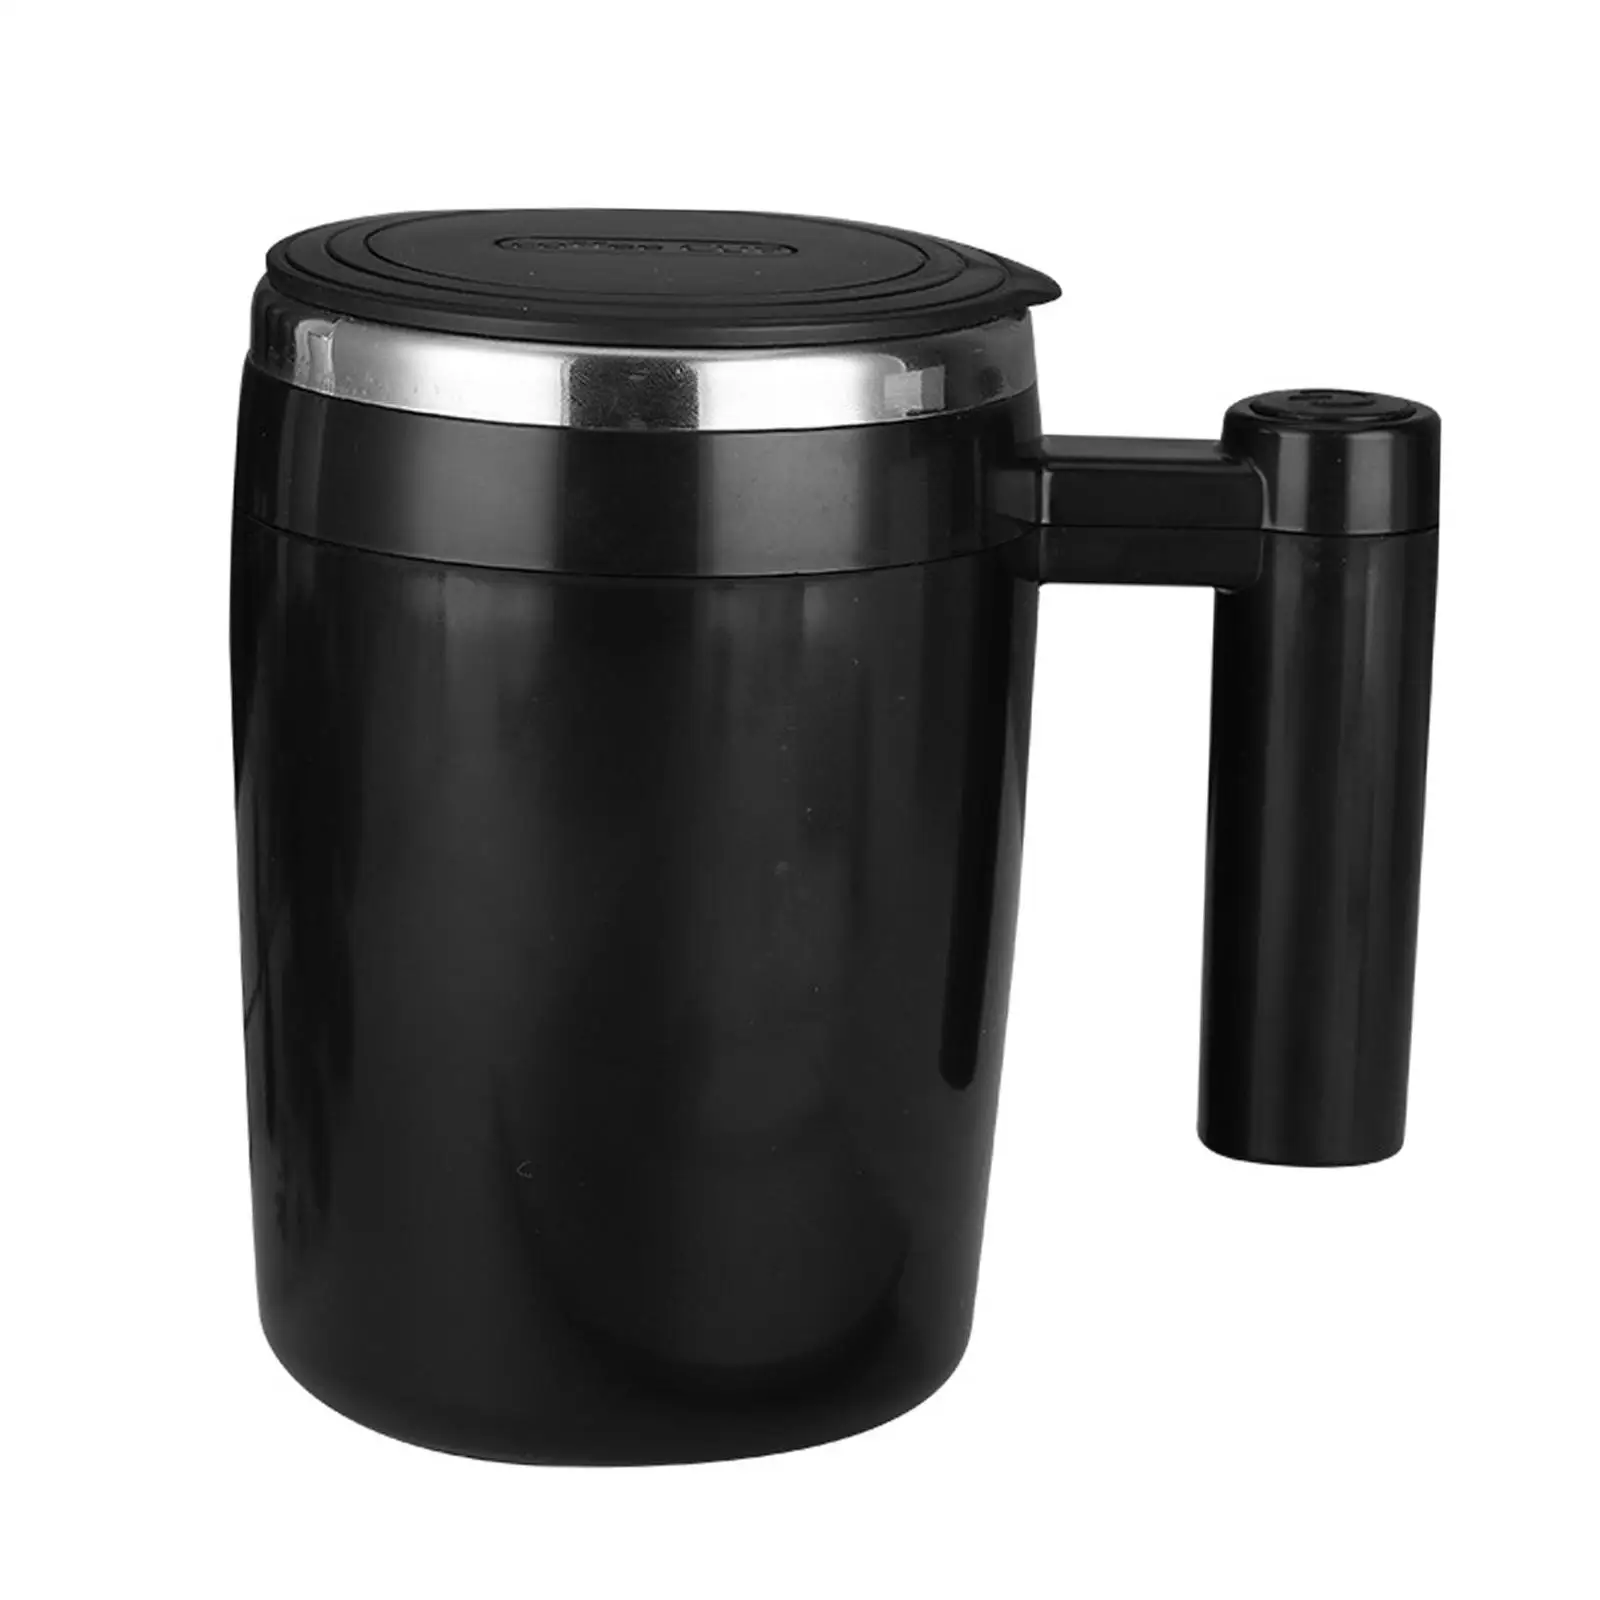 Self Stirring Mug for Coffee, Milk,and Other Beverages Stainless Steel Electric Self Mixing Coffee Tumbler for Travel Office